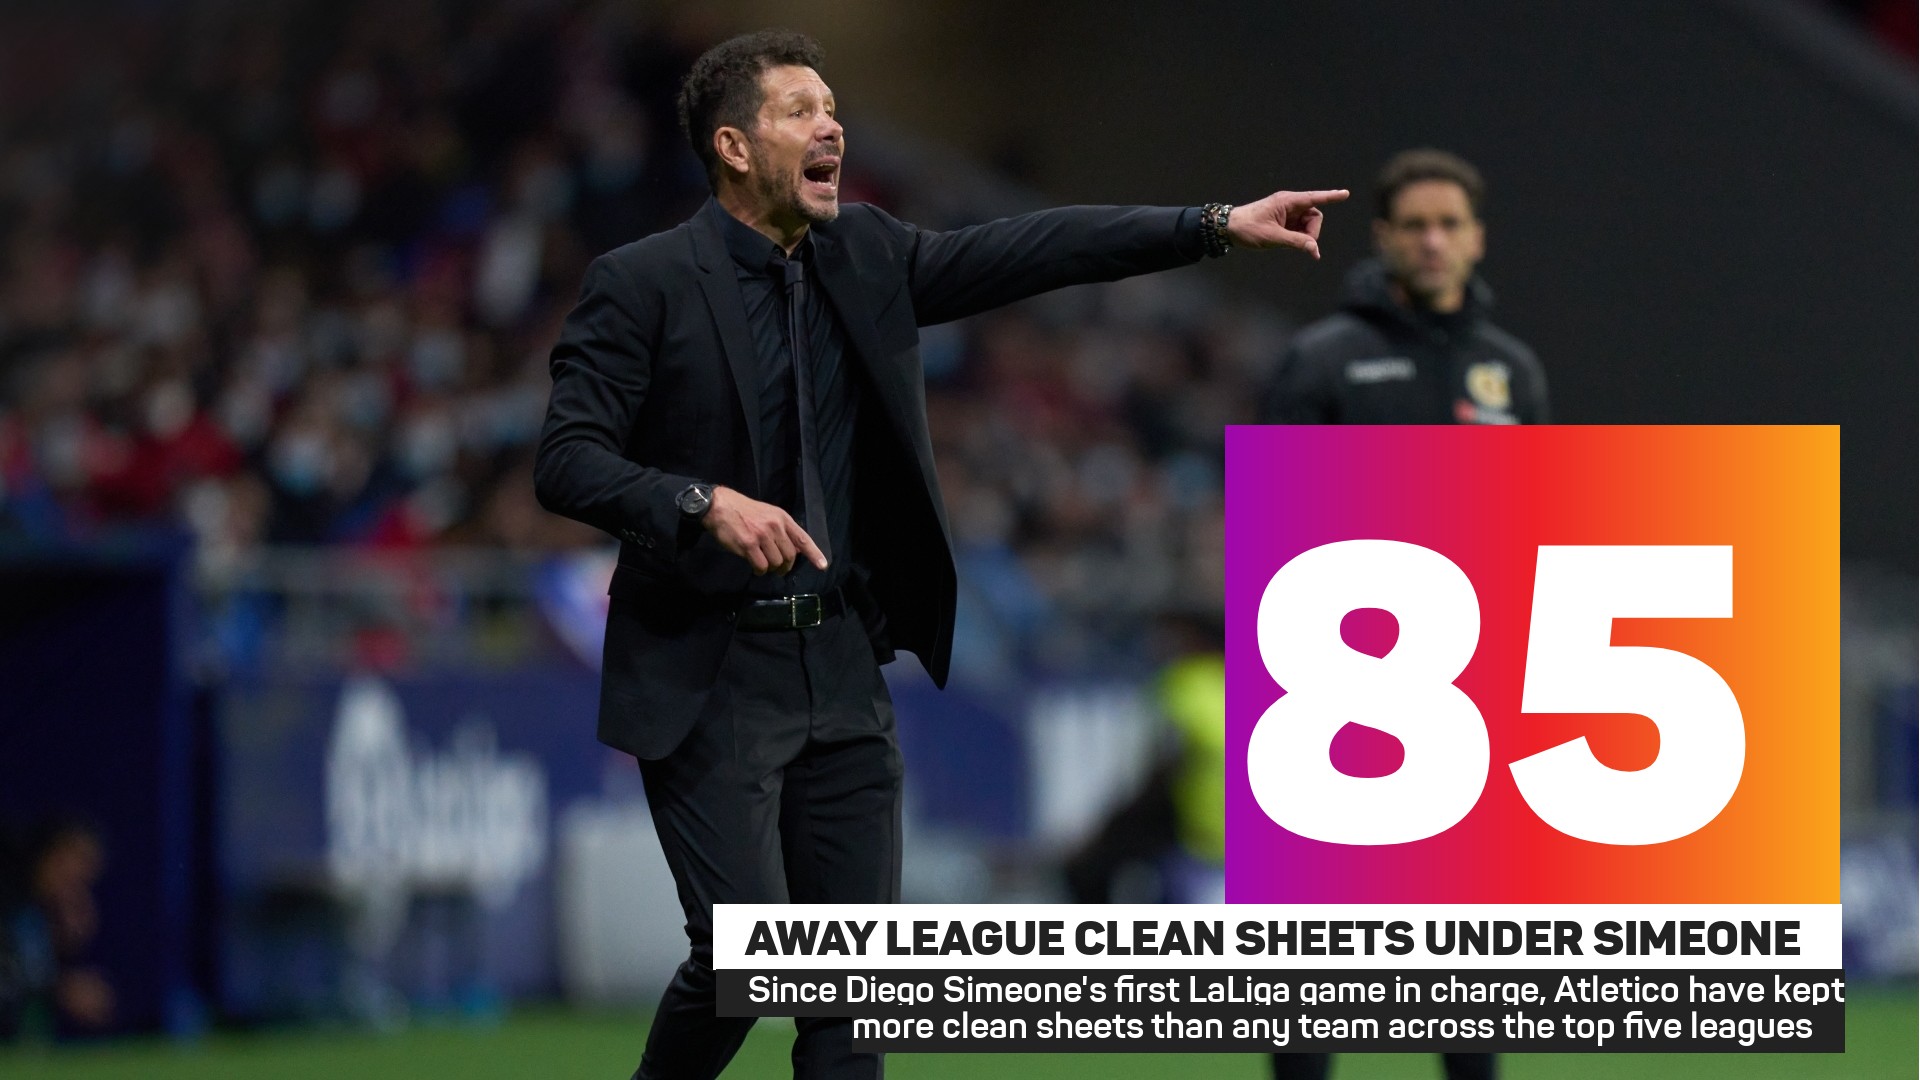 Since Diego Simeone's first LaLiga game in charge, Atletico have kept more clean sheets than any team across the top five leagues